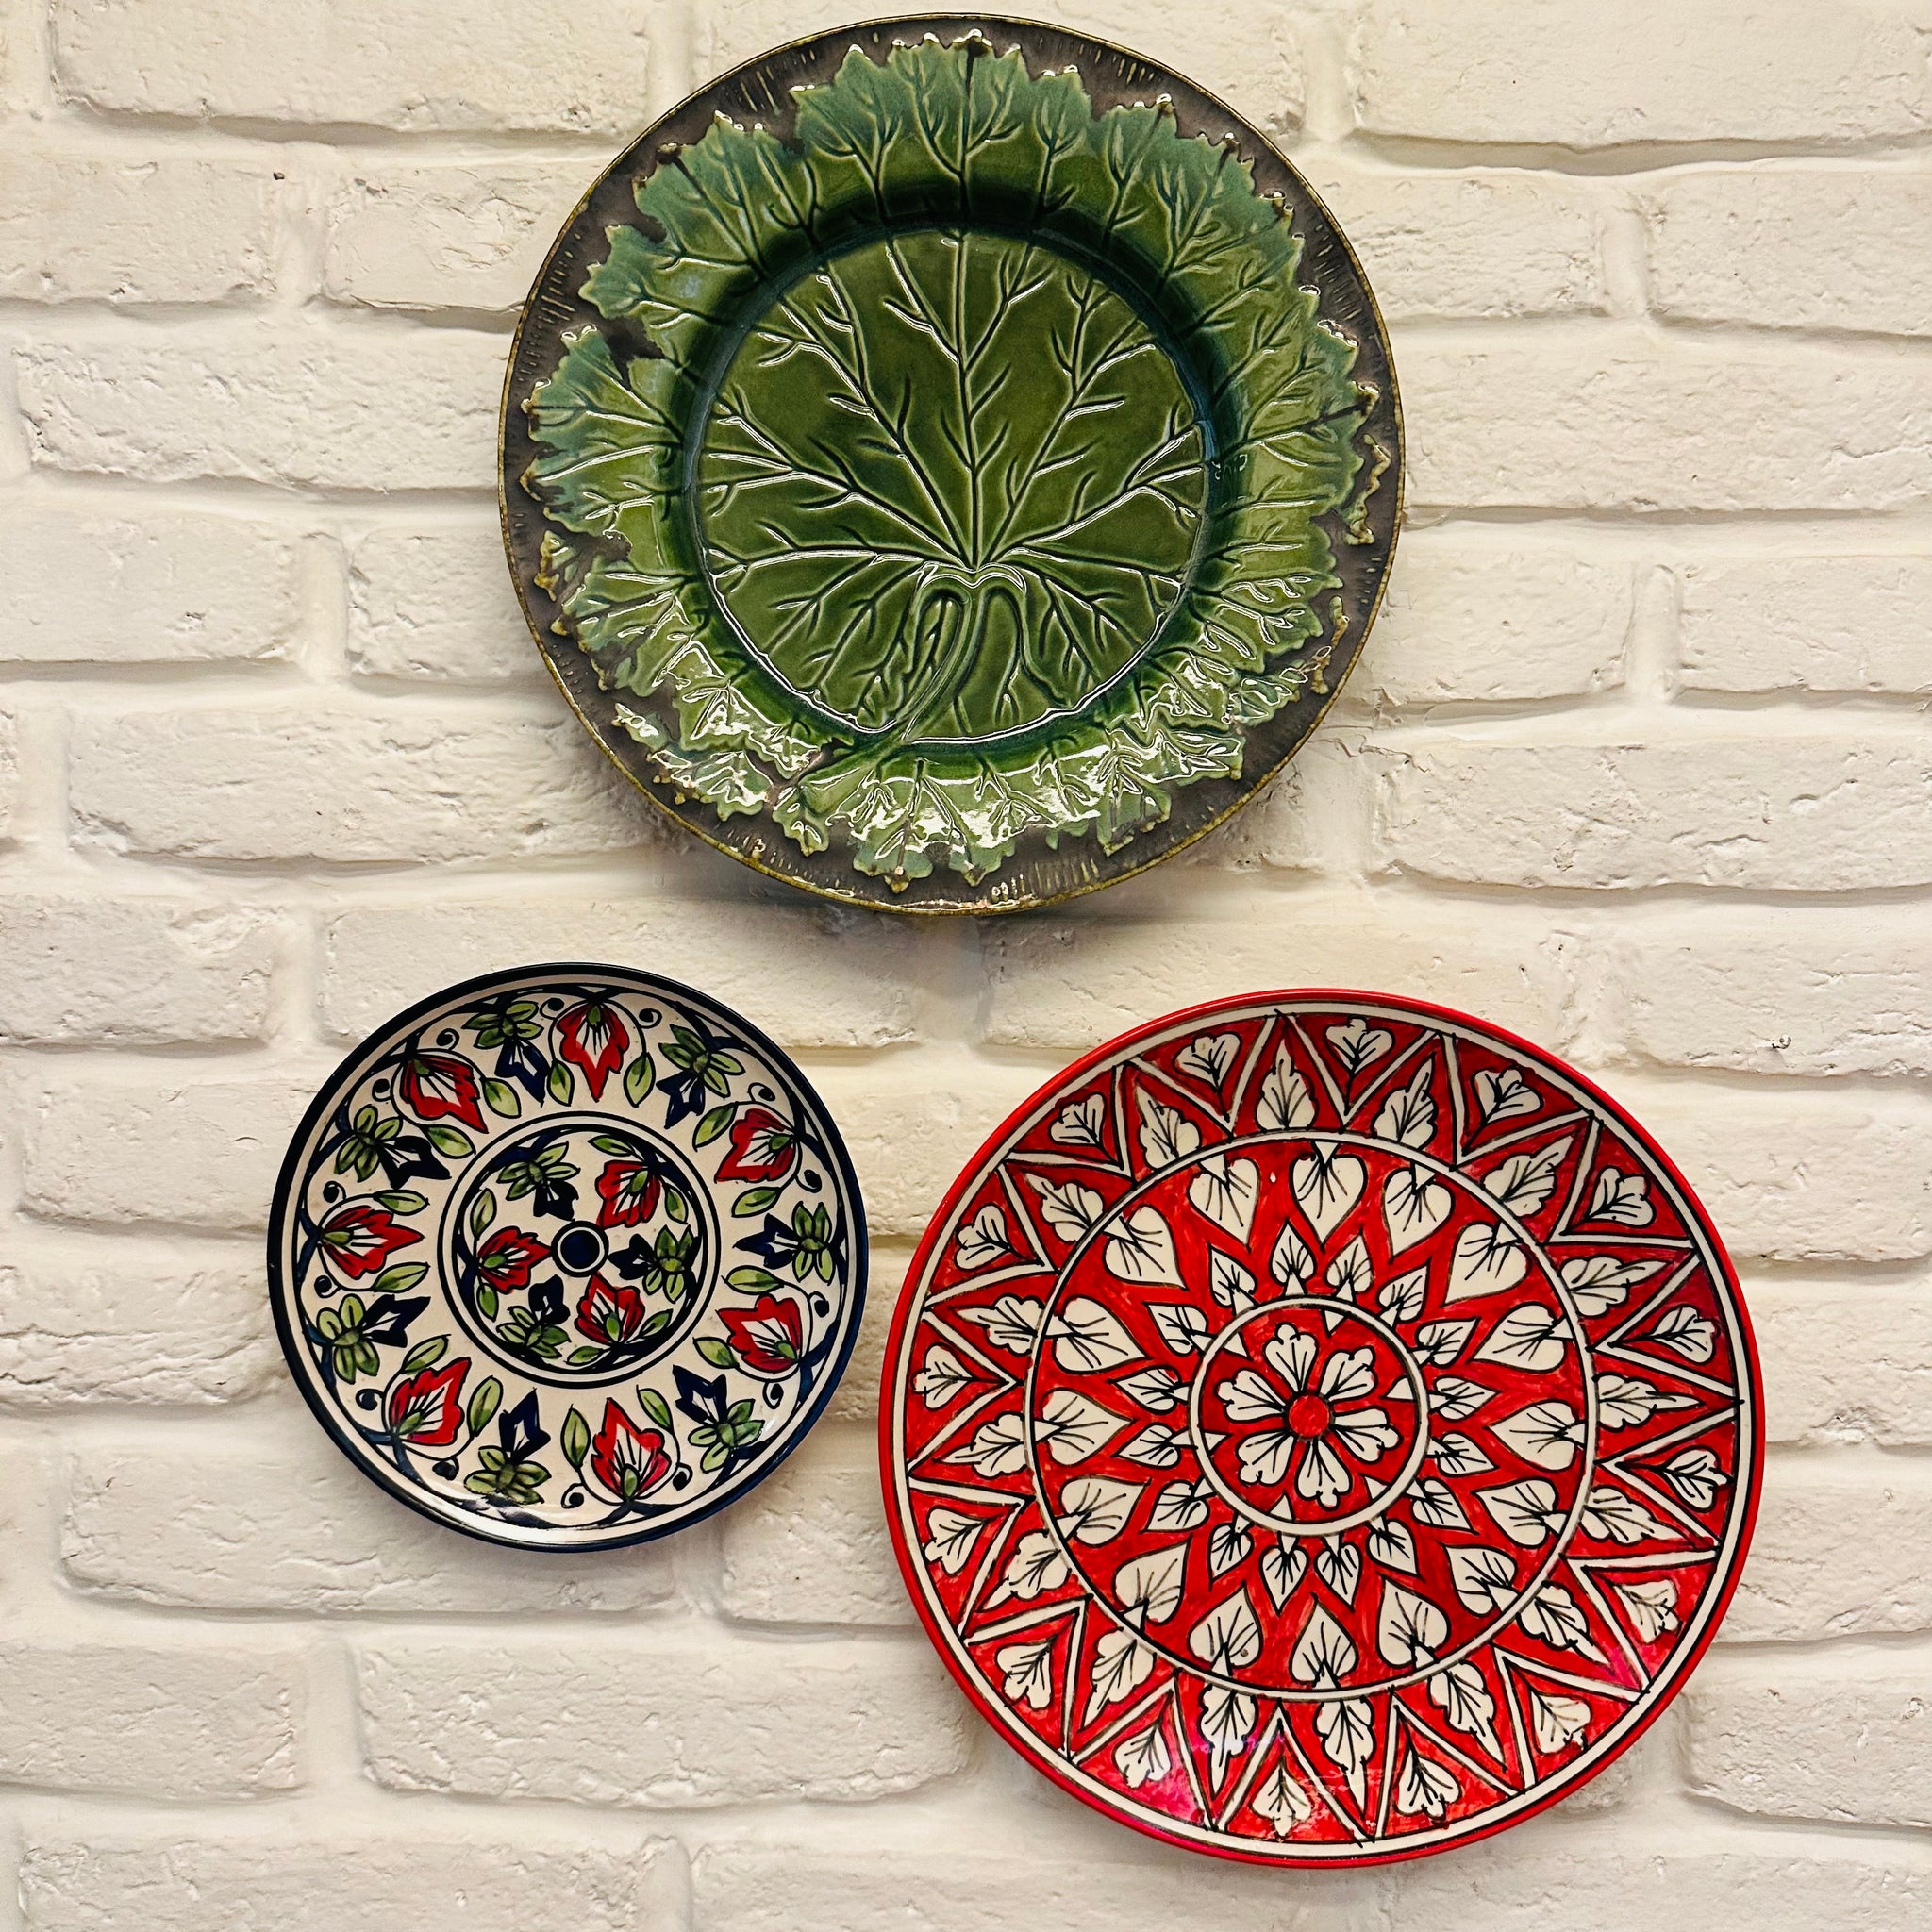  Artisanal Wall Plate Collection, Bedroom Wall Plate Ensemble, Classical Appeal Wall Décor, Classical Indian Wall Décor, Hand Painted Artisanal Plates, Handcrafted Home Accents, Handcrafted Indian Artisans, Indian Artisan Wall Décor, Lily Designer Hand Painted Wall Plates, Small Batch High-Quality Décor, Unique Handcrafted Wall Plates, Unique Living Room Décor, Vibrant Lily Wall Art, Vibrant Wall Accent Pieces, Wall Hanging Hook Included, tesu